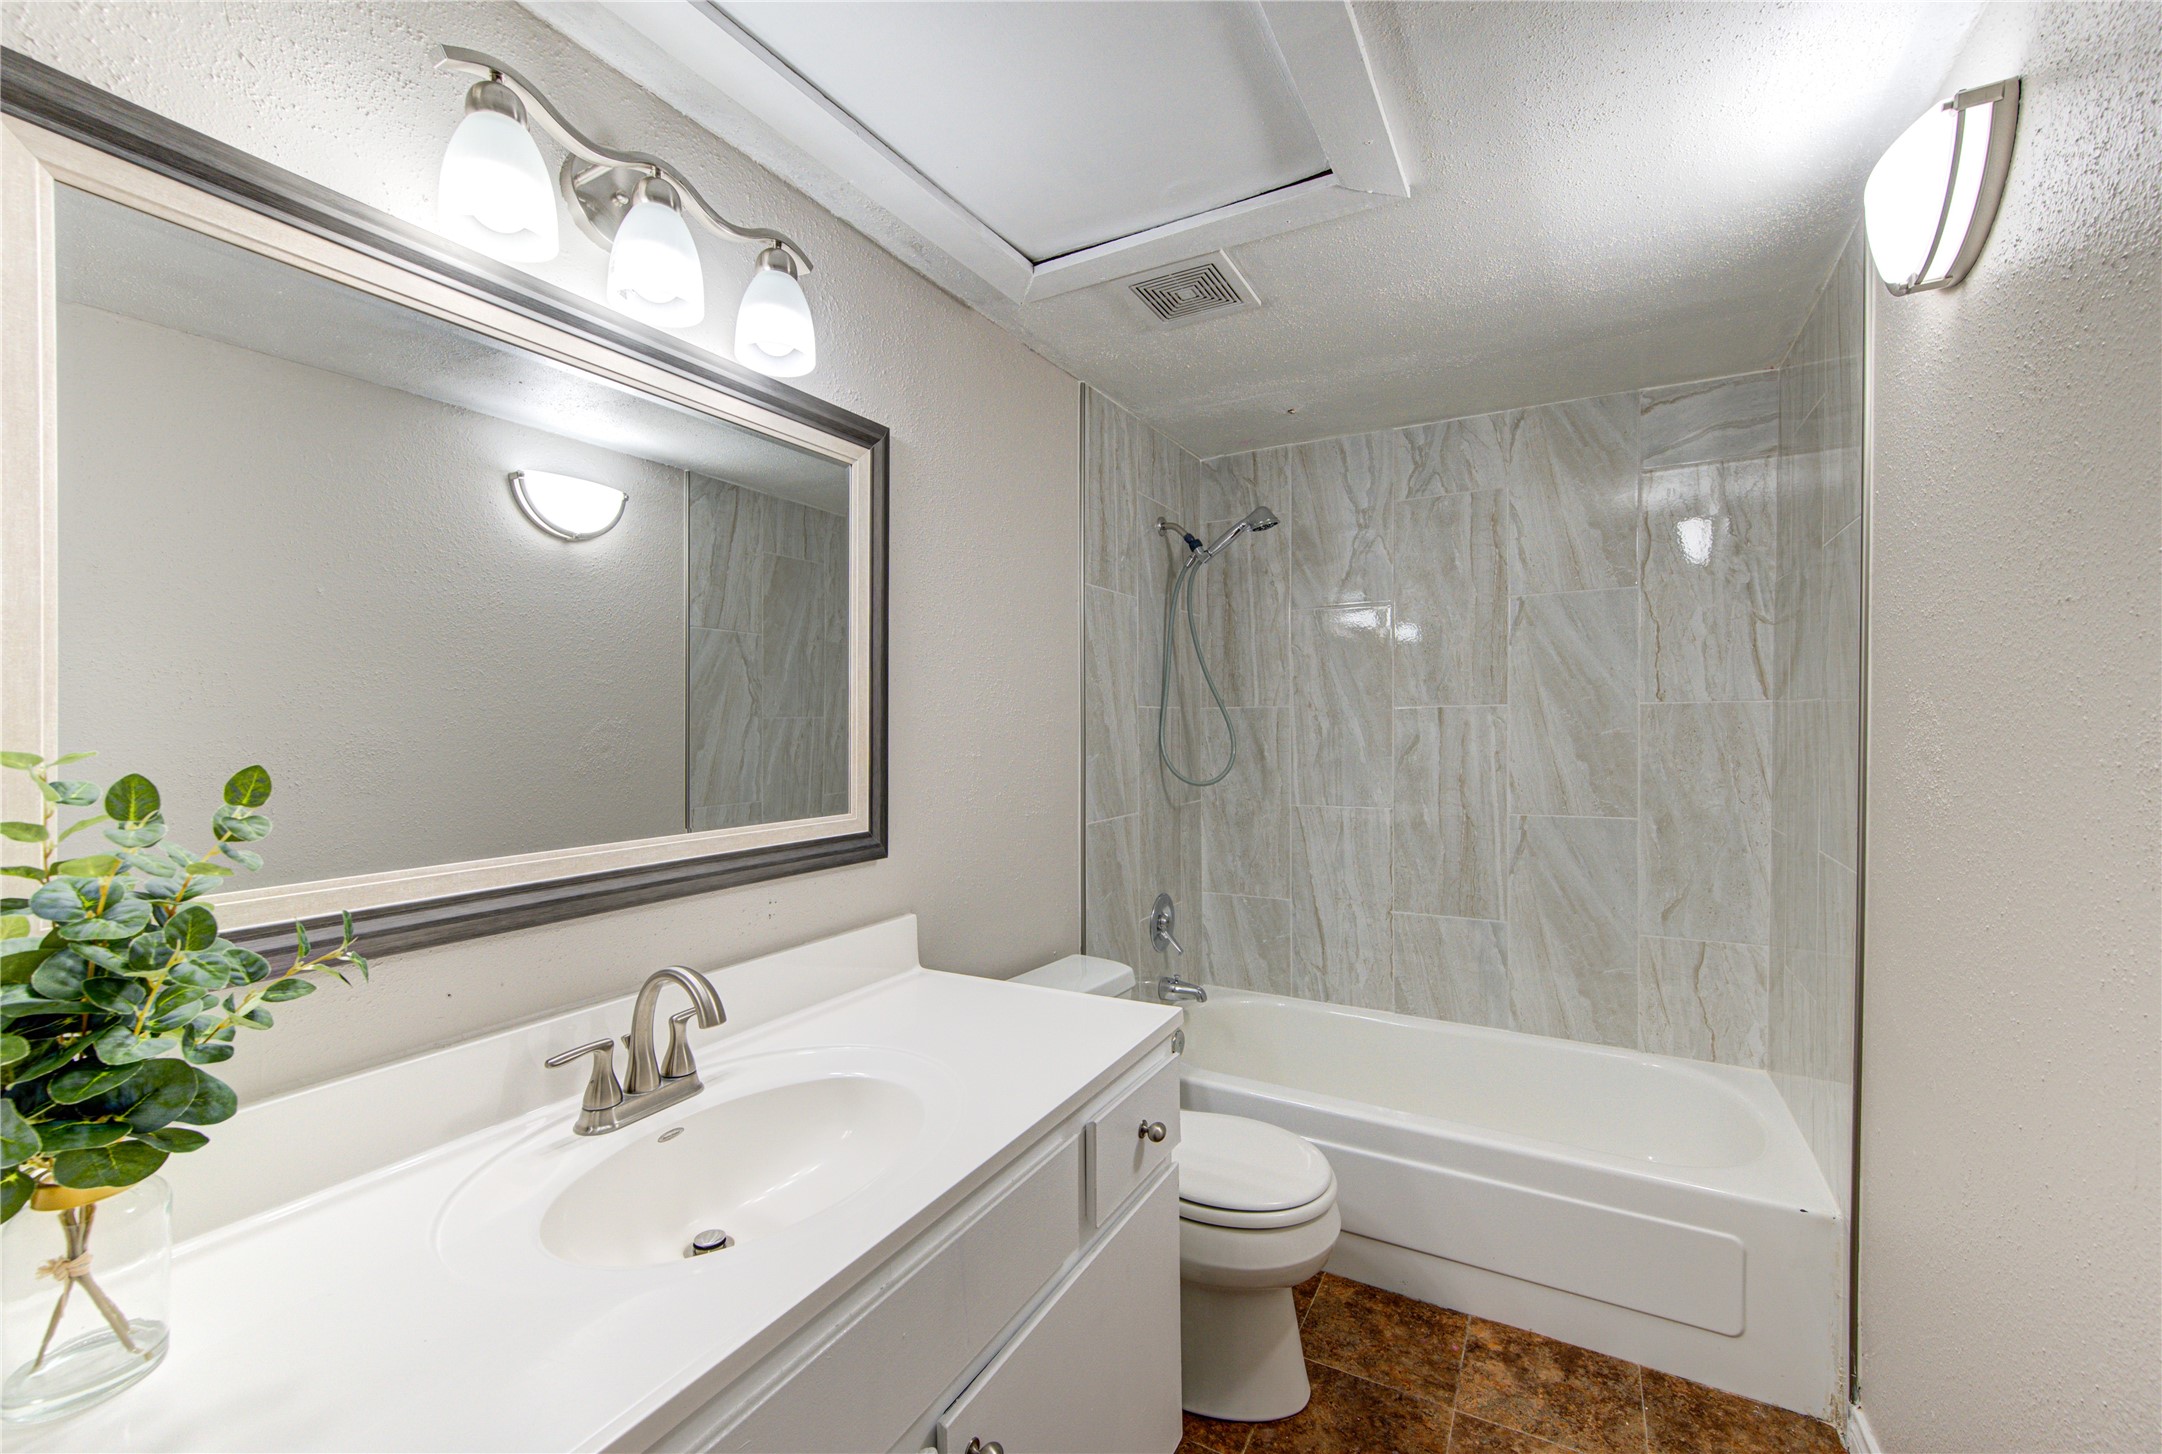 Updated secondary bathroom with new lighting, a new designer mirror and marbled tub!